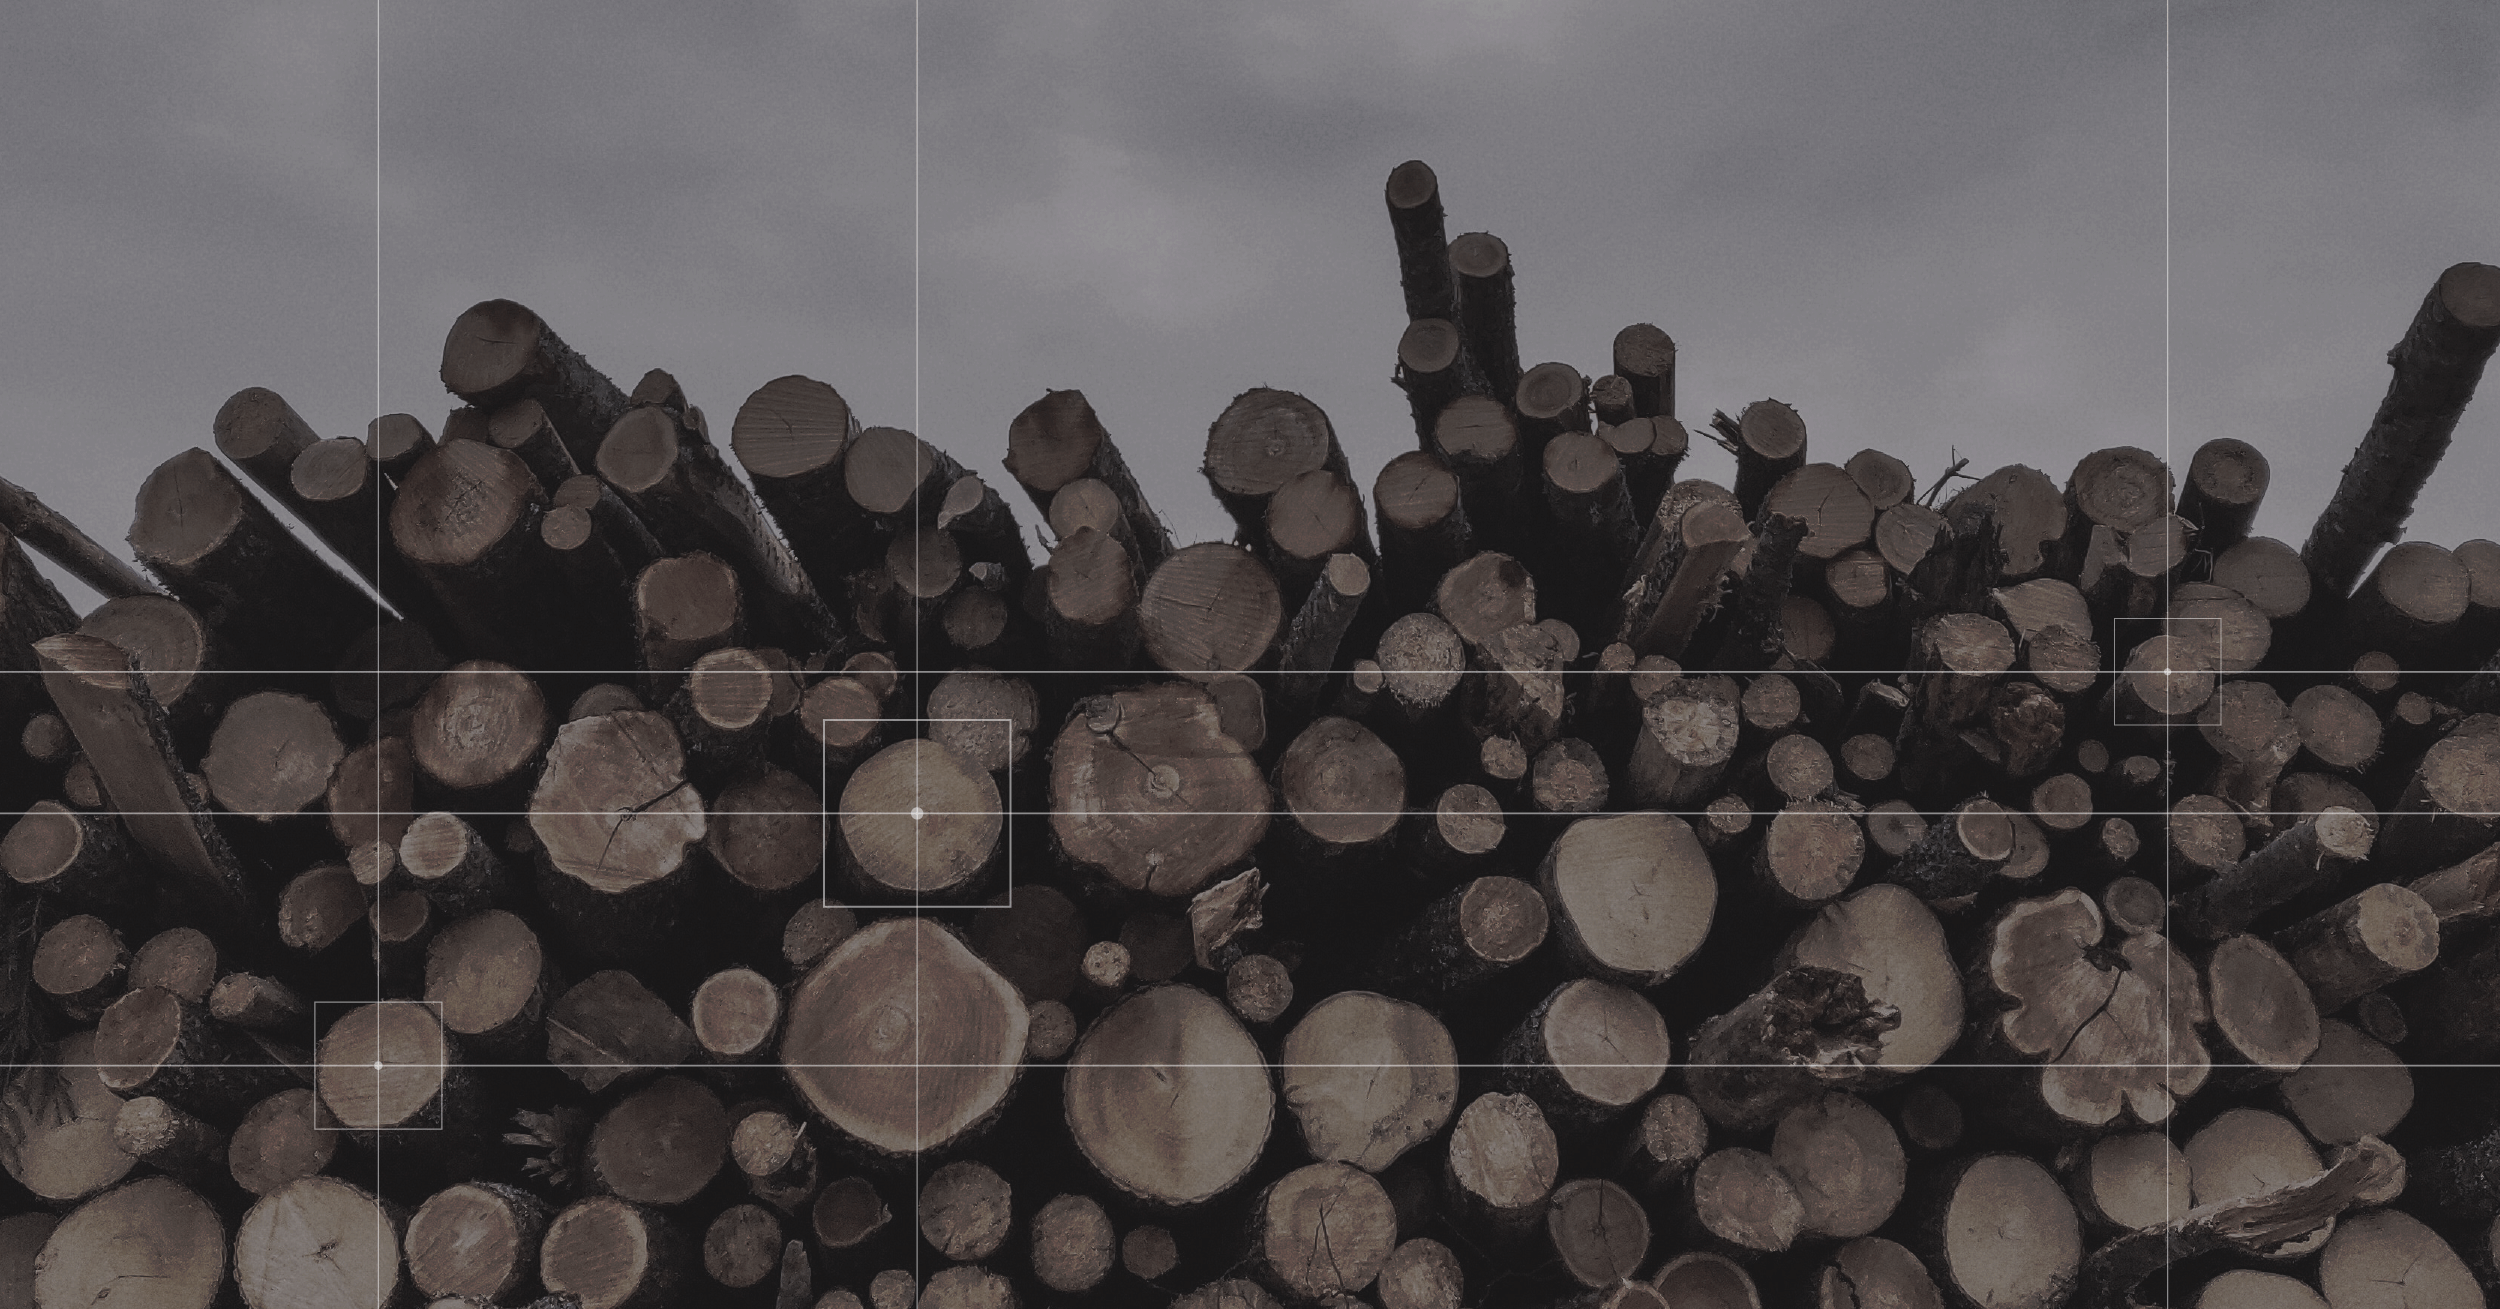 How to Ensure ESG Compliance: A Look at High-Risk Timber Imports